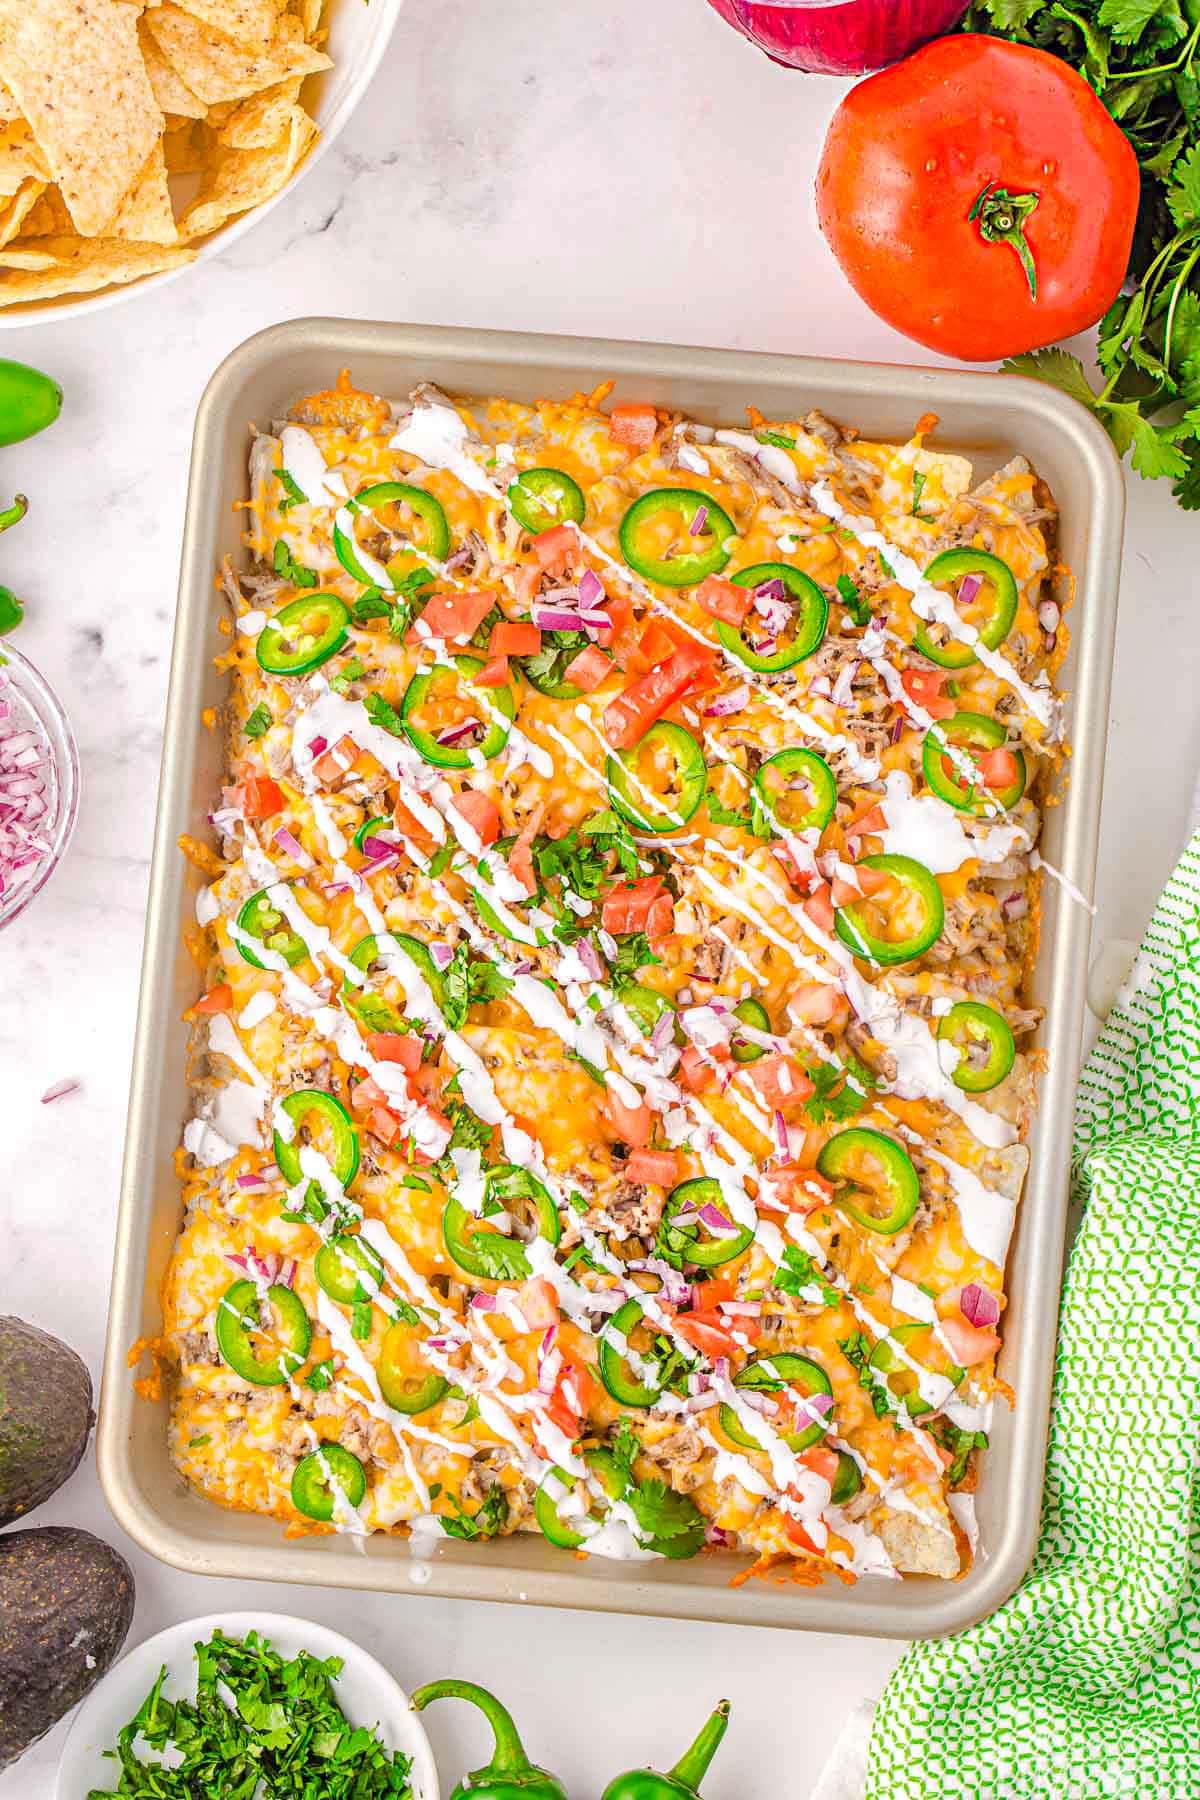 top down view of large baking sheet filled with loaded pulled pork nachos with a sour cream drizzle, sliced jalapenos, tomatoes, cilantro, and red onions. Ready to be enjoyed.